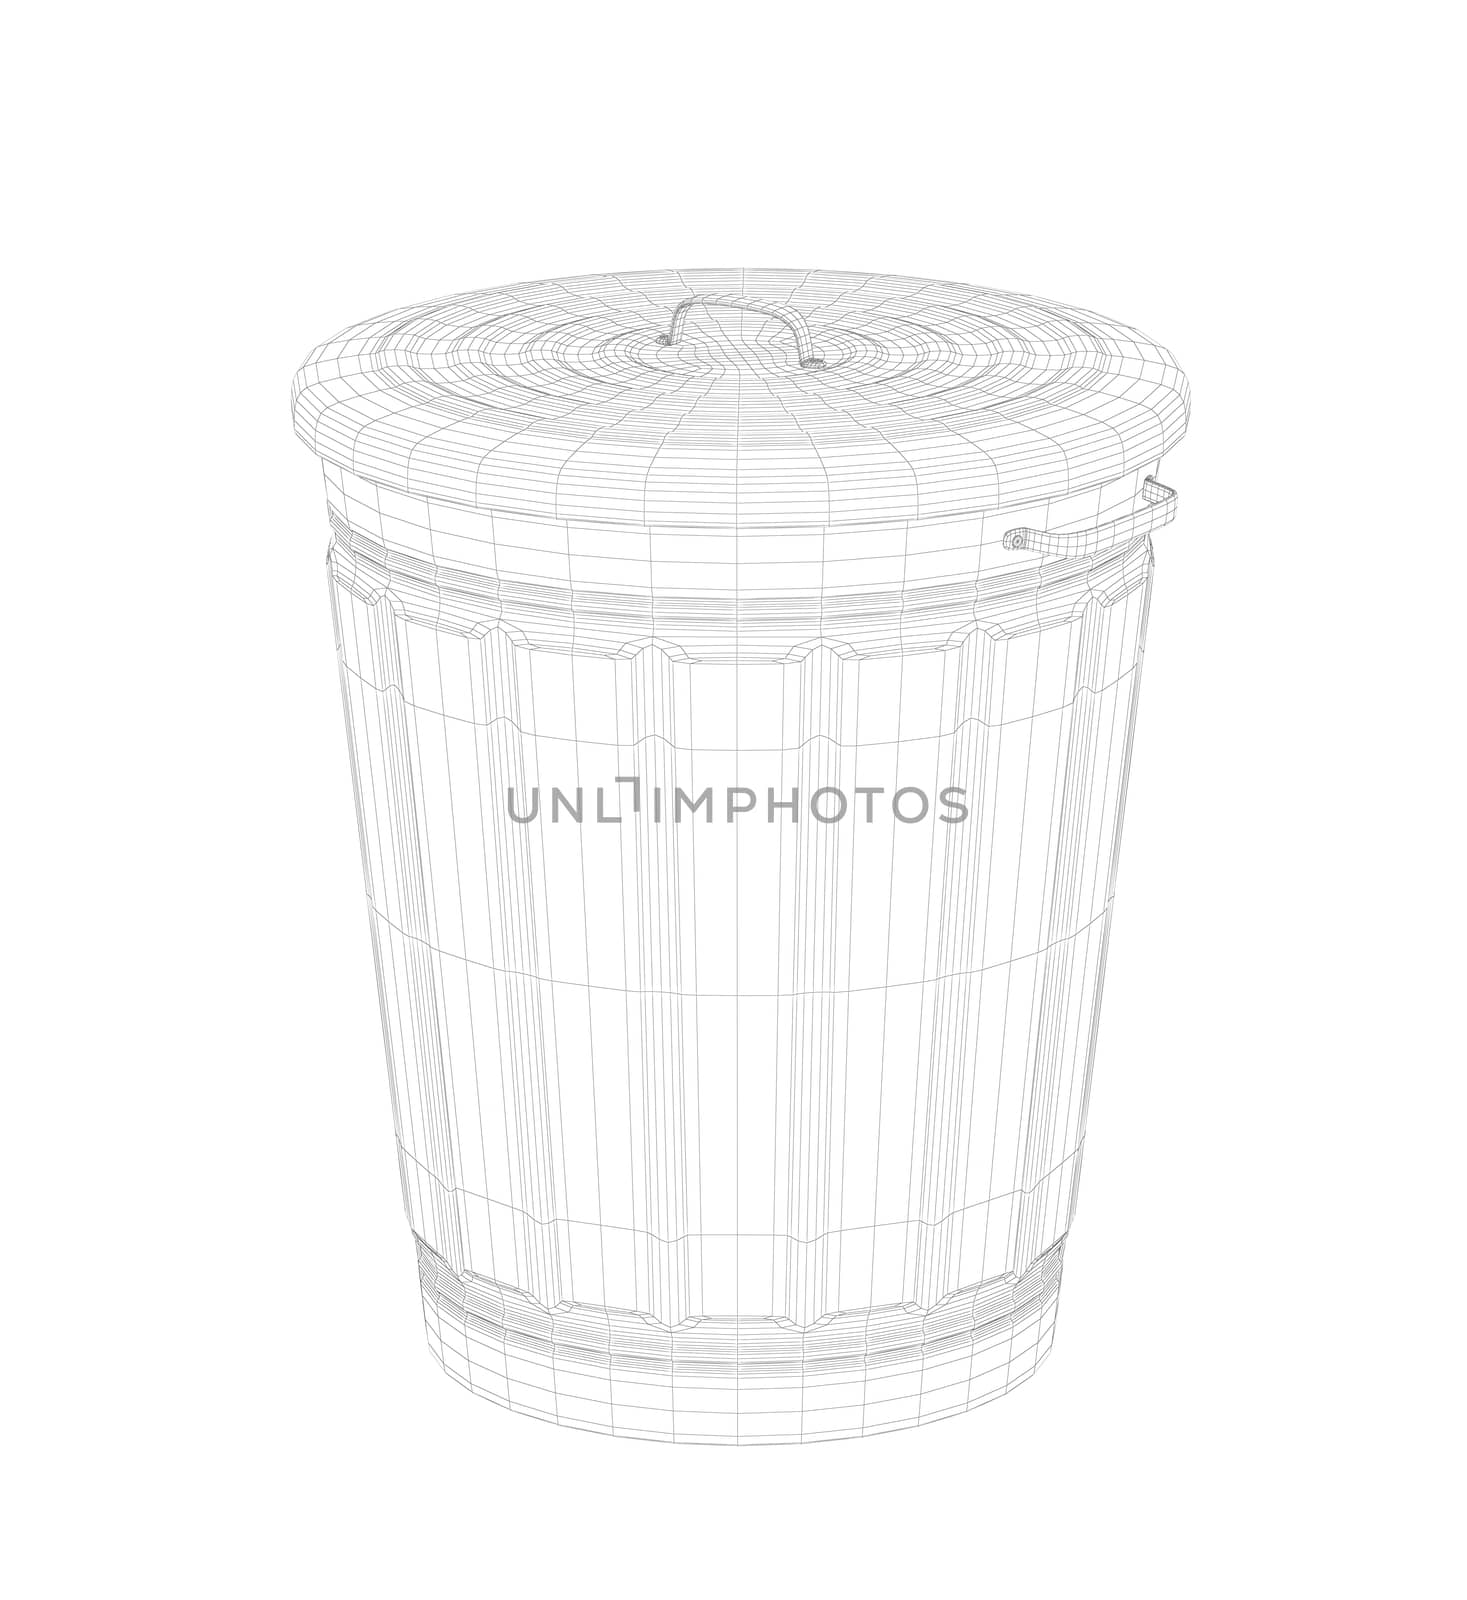 3D wire-frame model of trash can on white background